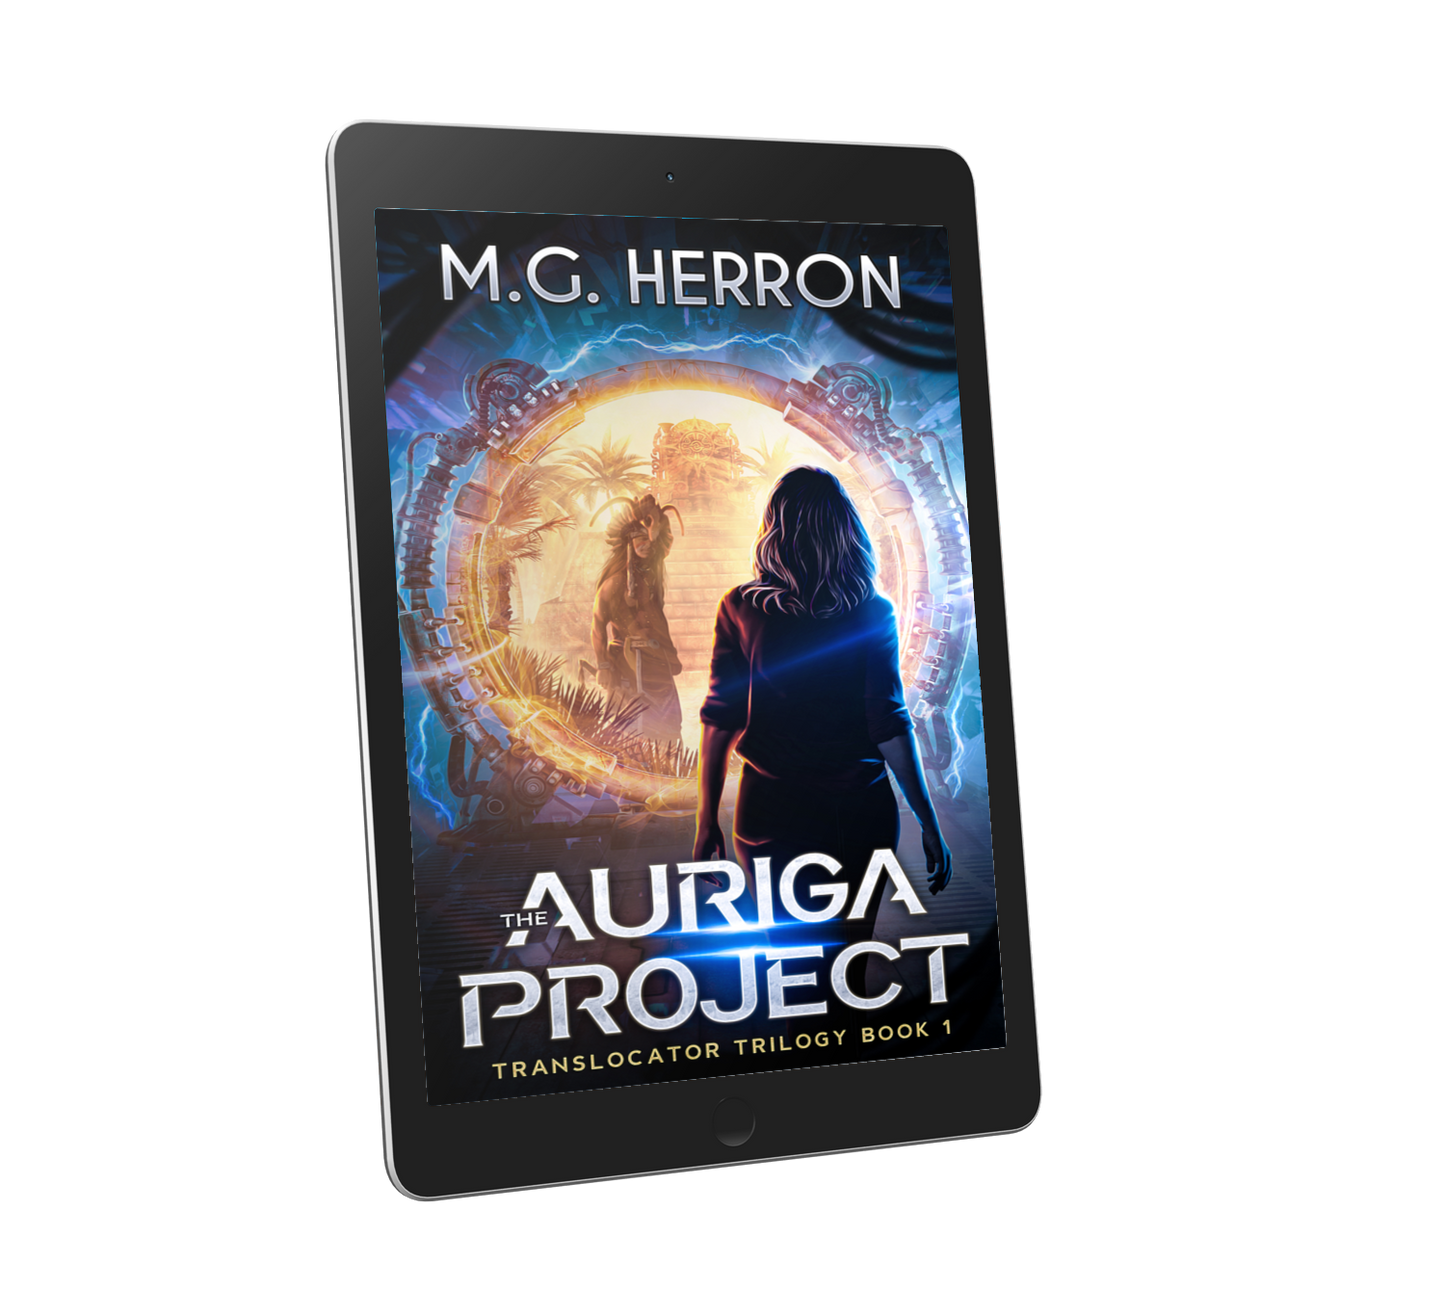 Book 1: The Auriga Project